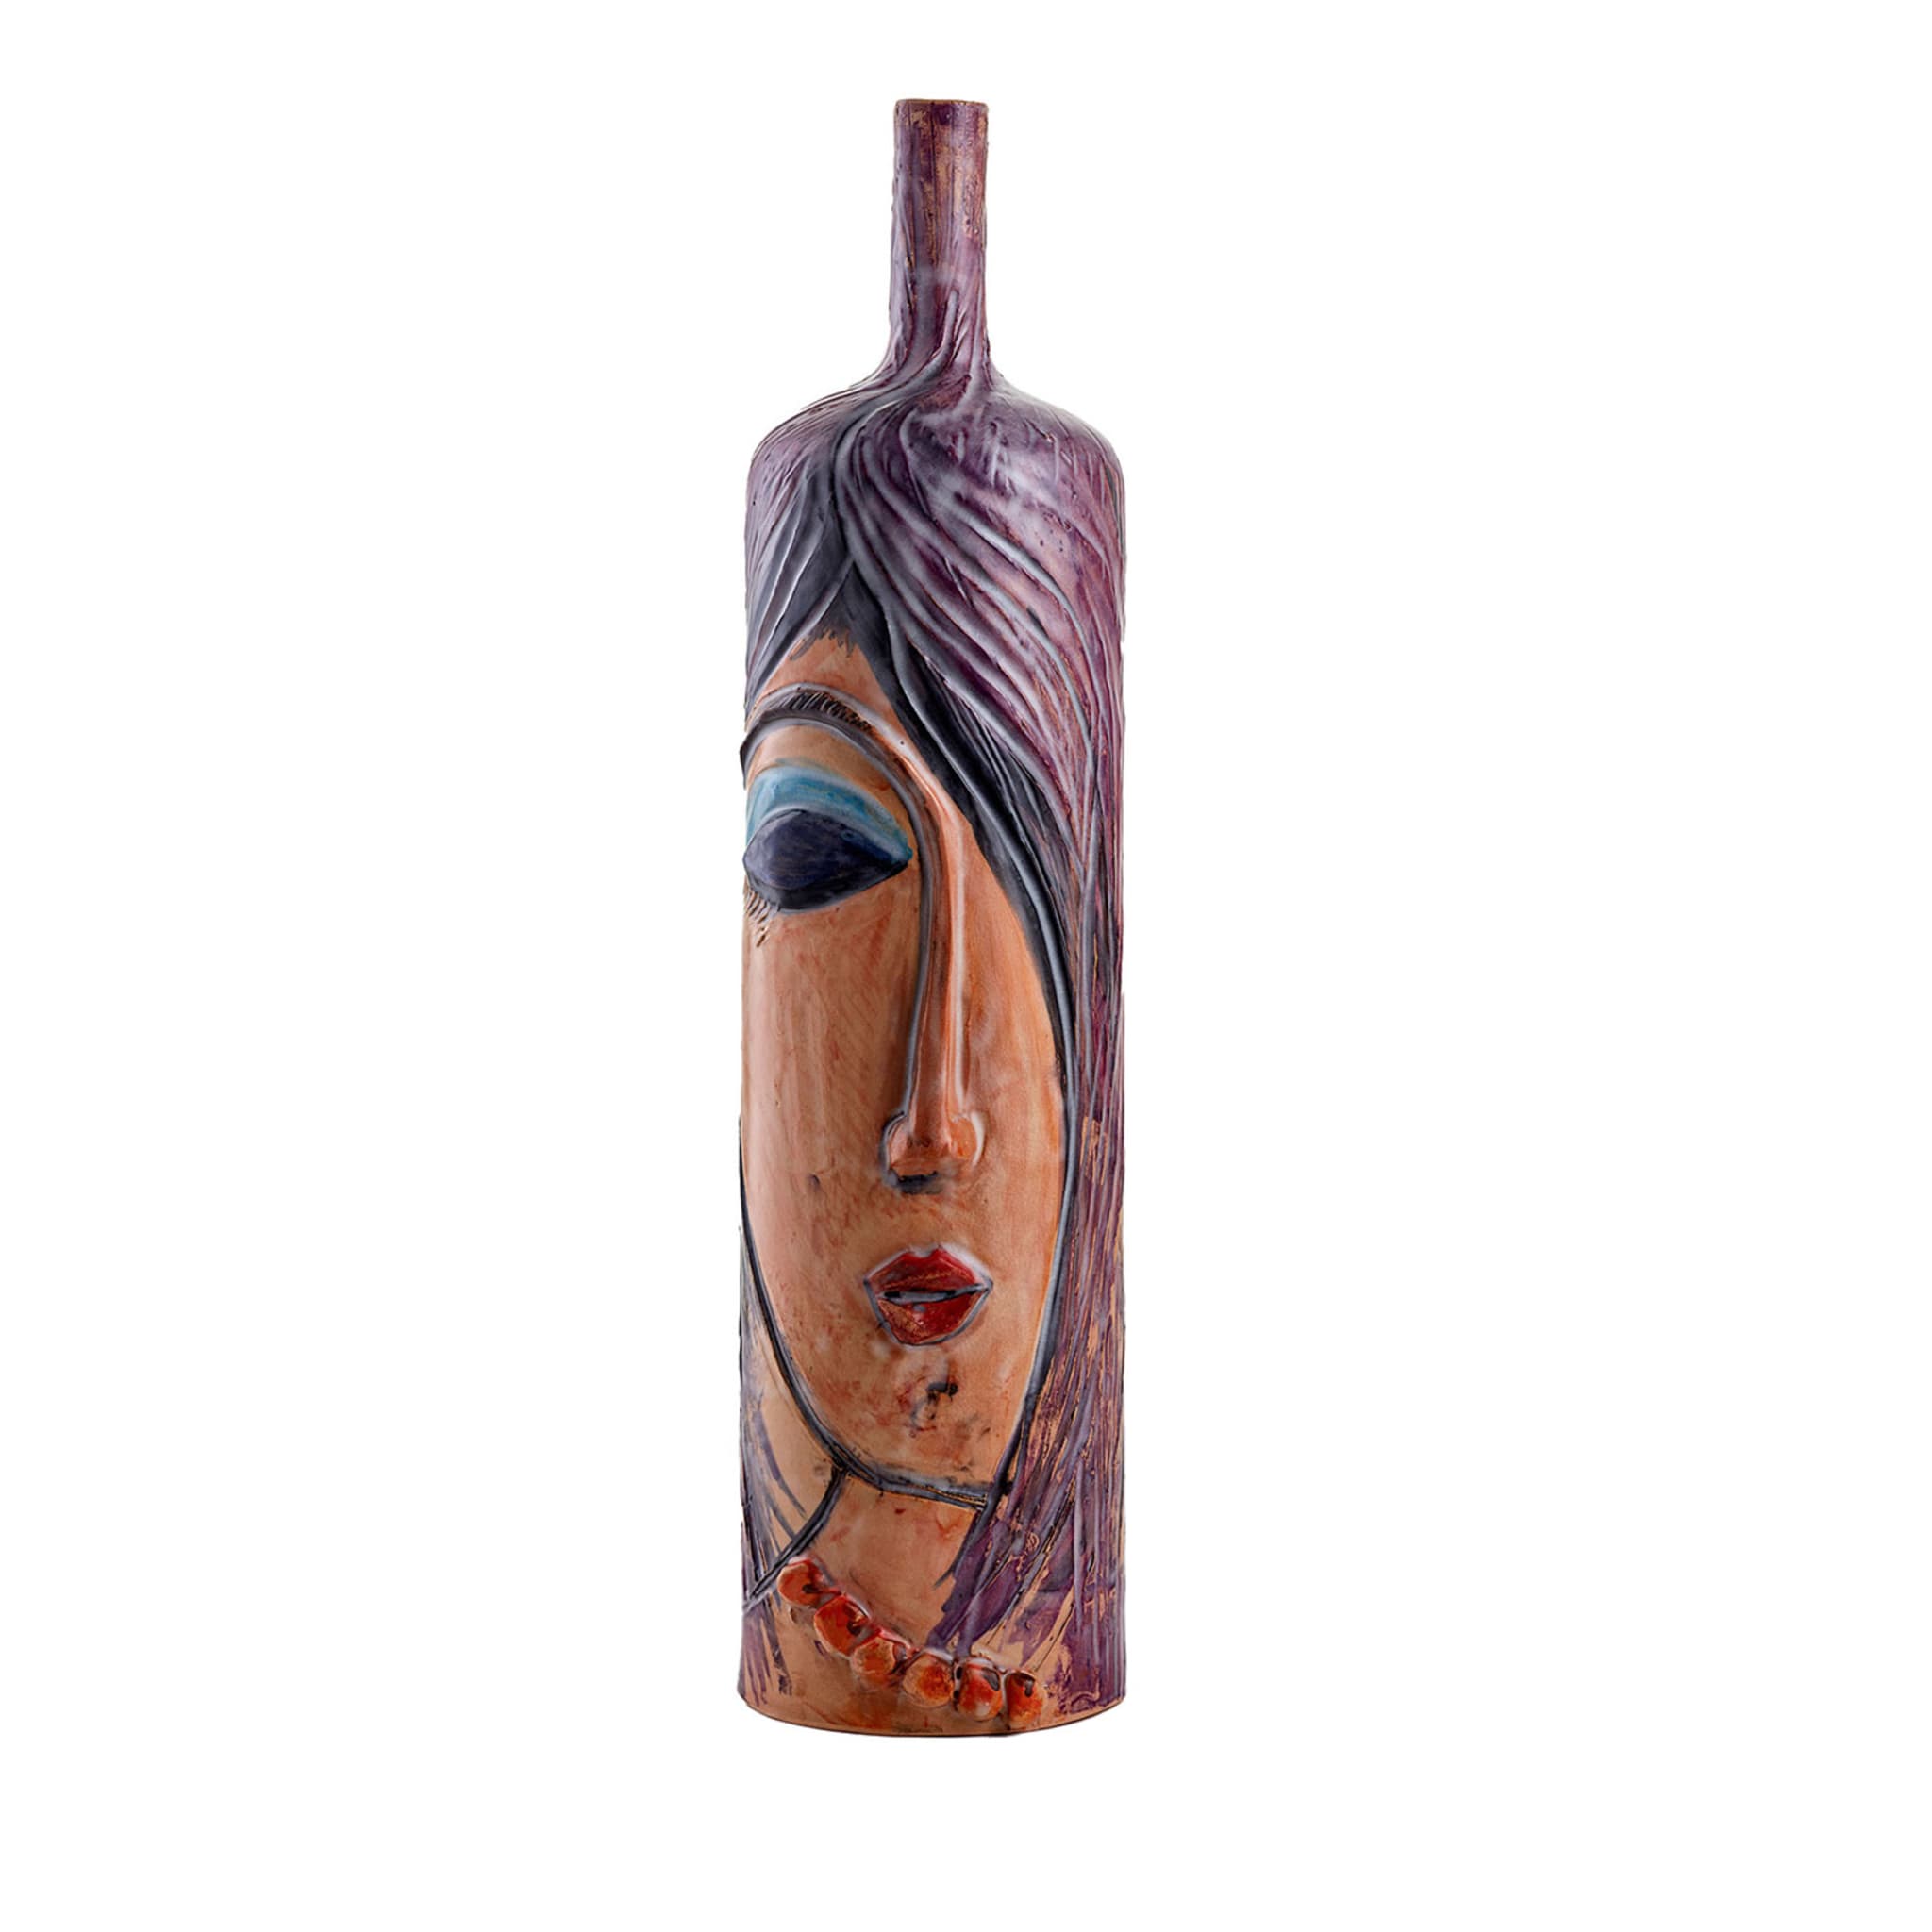 Anthropomorphic-Inspired H55 Polychrome Bottle/Sculpture #1 - Main view